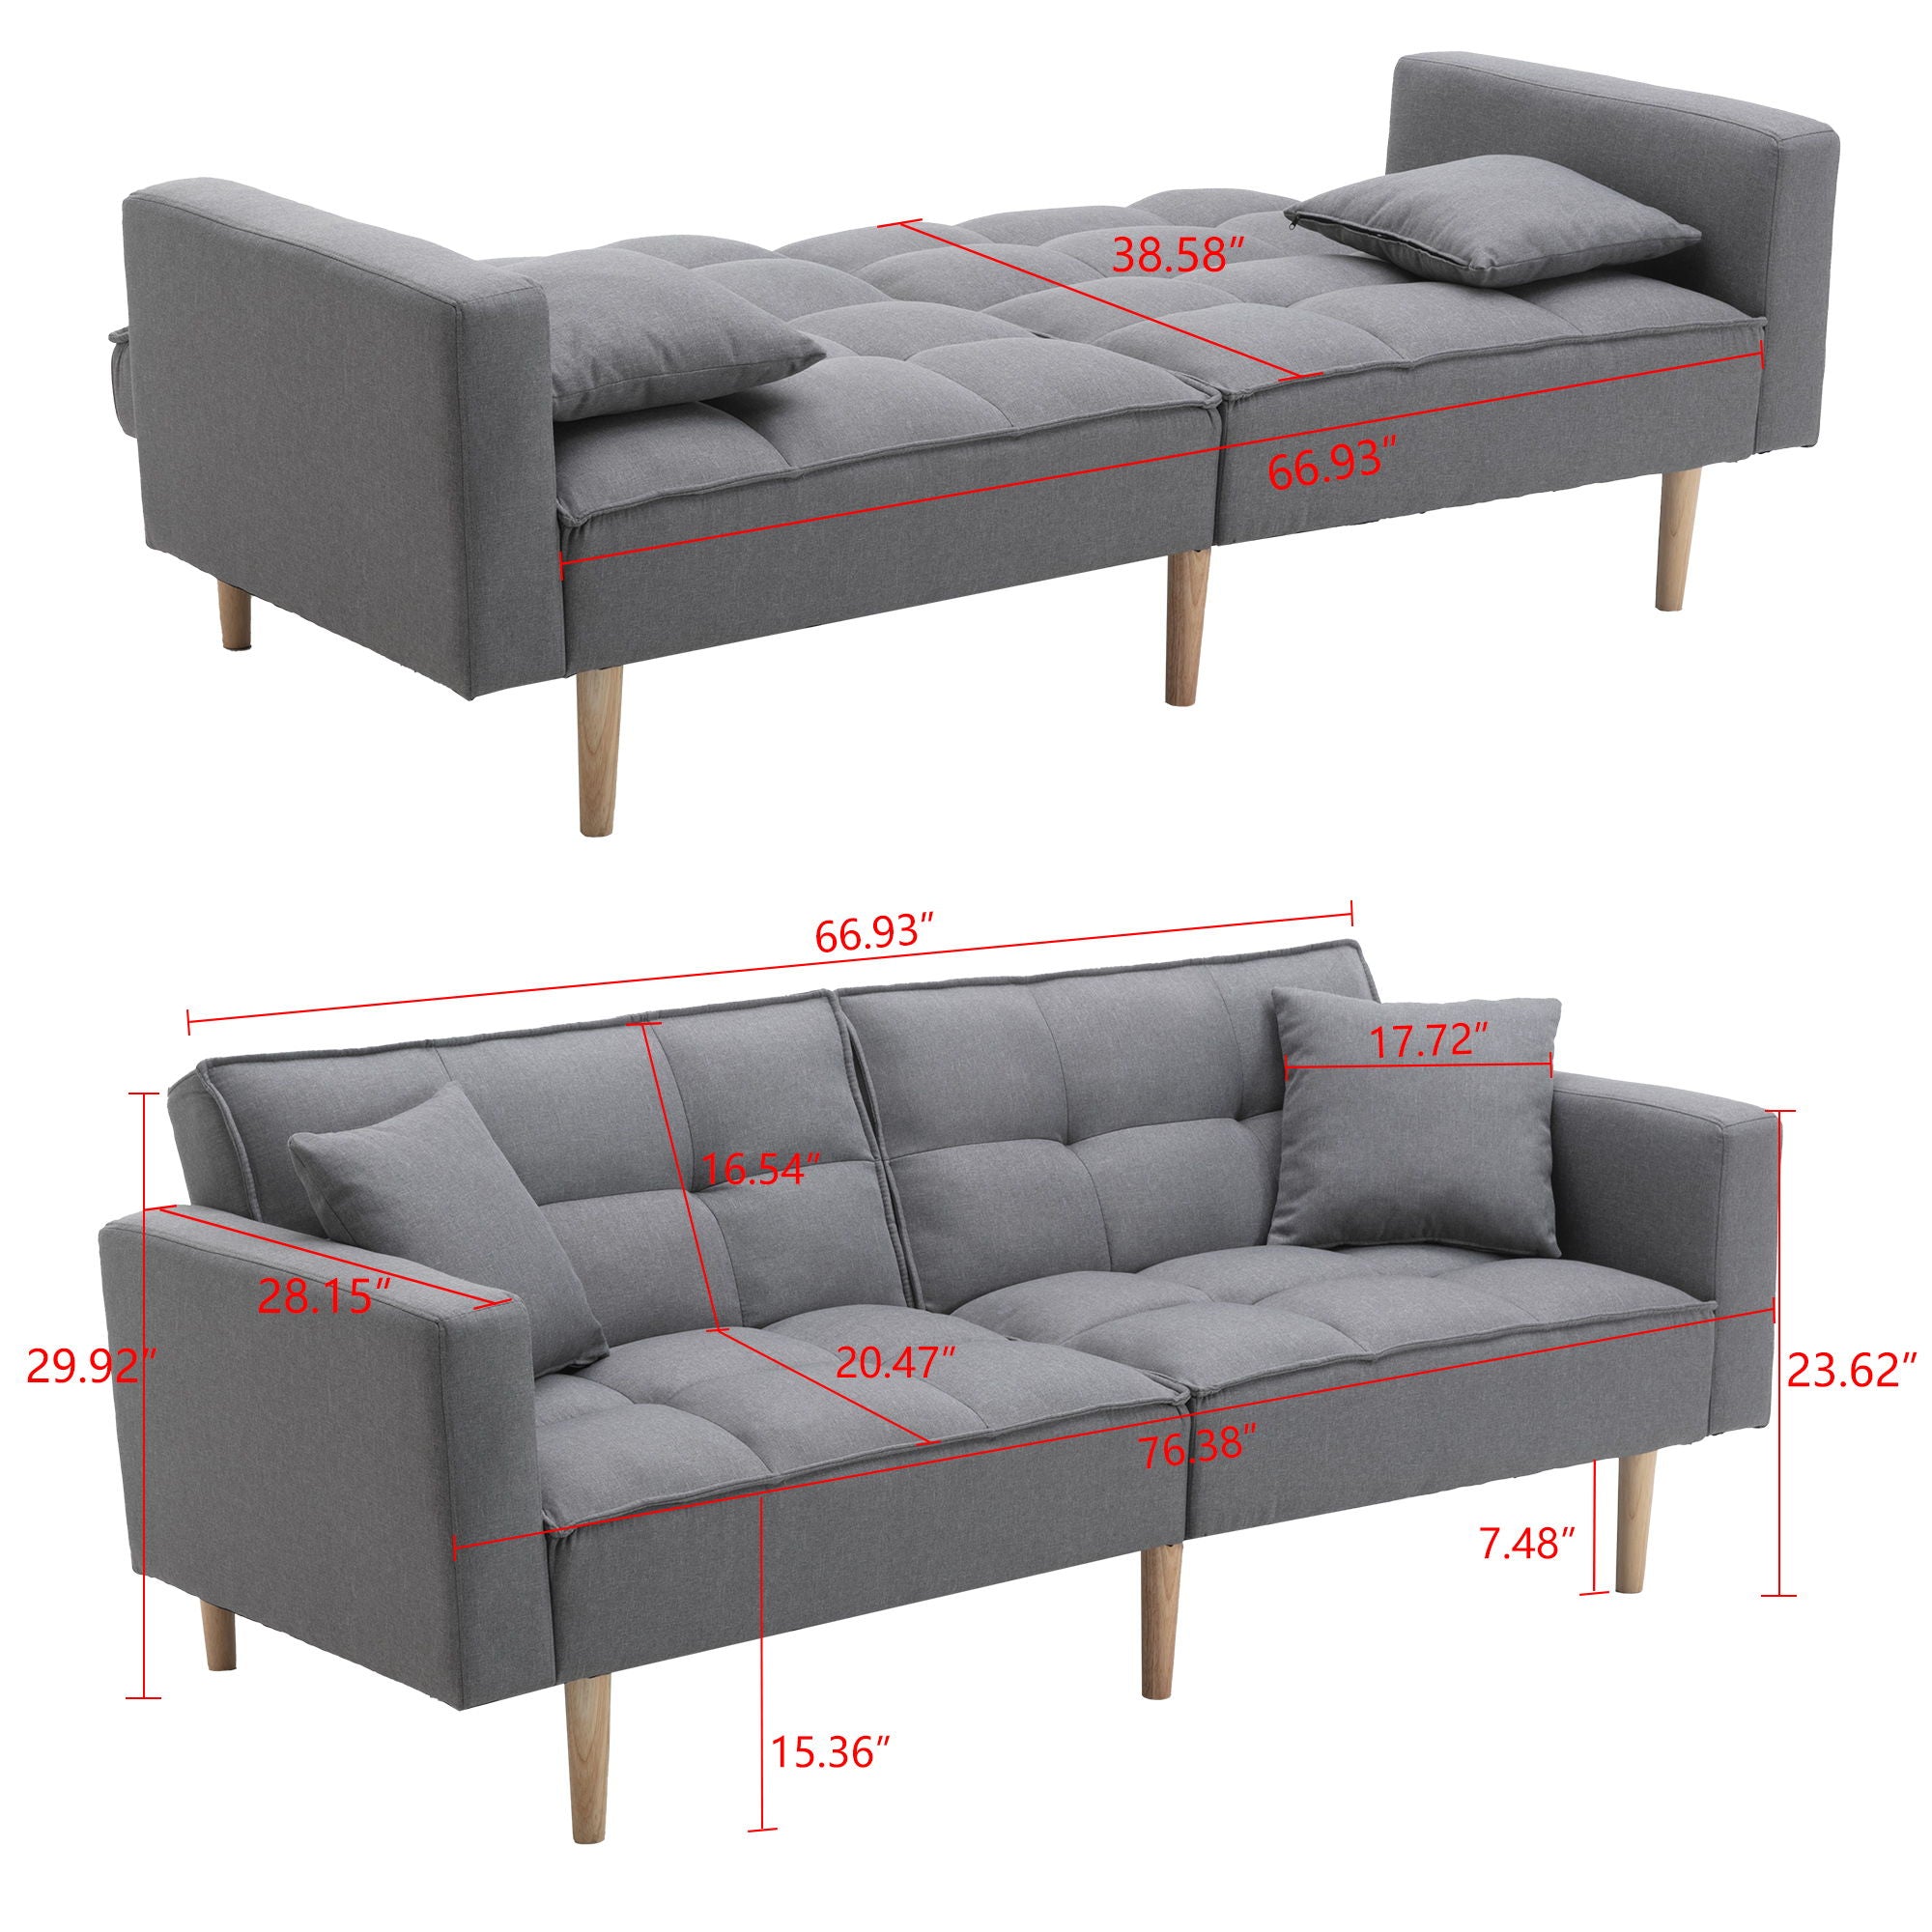 Dongheng Convertible Futon Sofa Bed For Living Room, Linen Sofa With Solid Wooden Legs, Light Gray